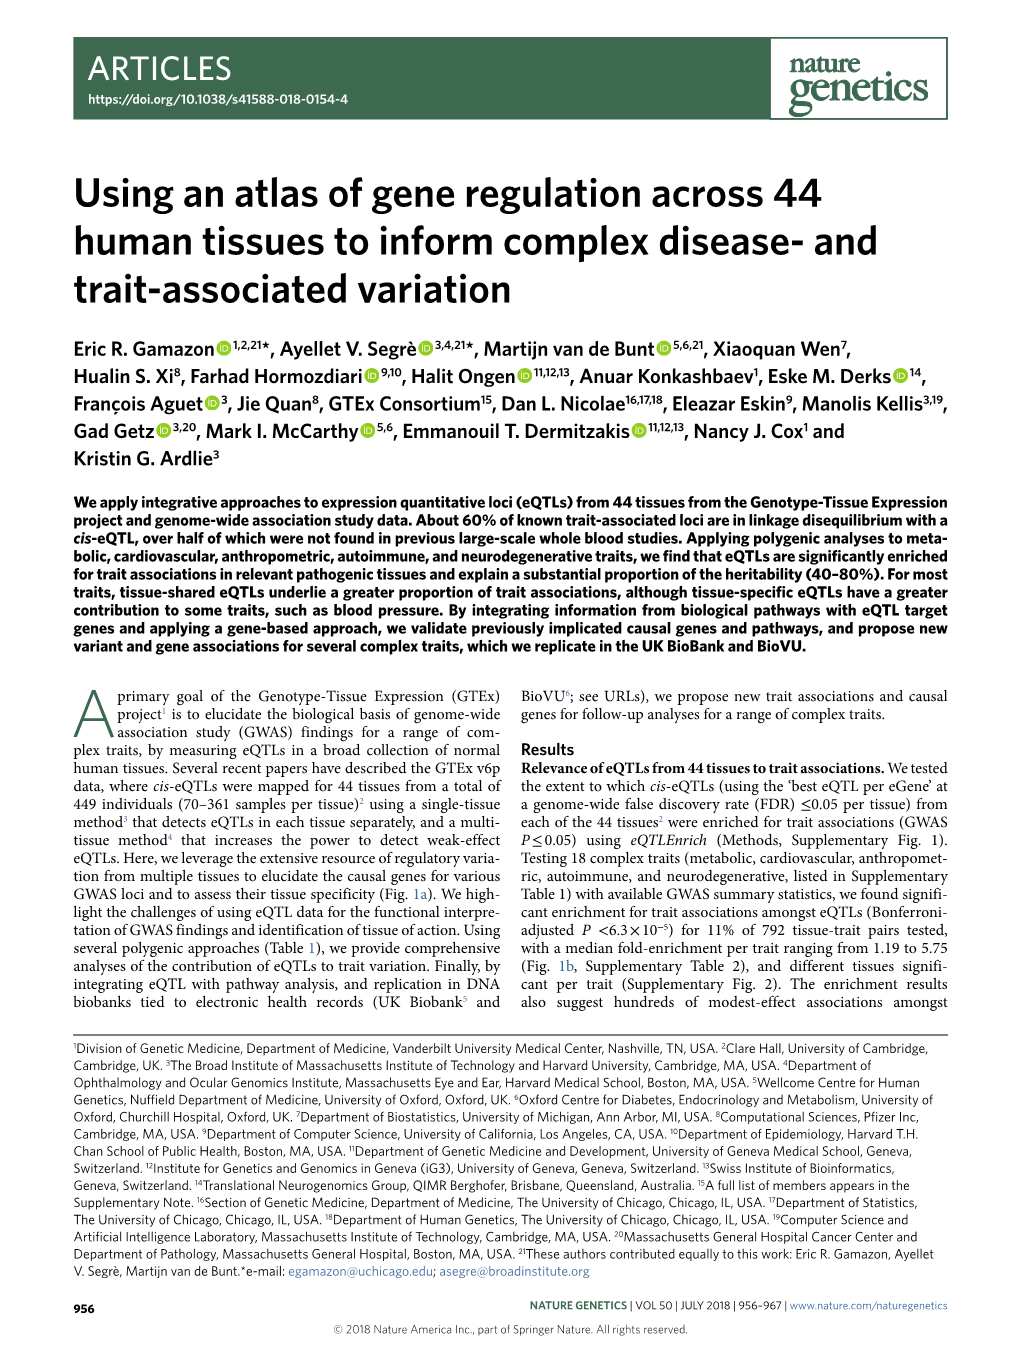 Using an Atlas of Gene Regulation Across 44 Human Tissues to Inform Complex Disease- and Trait-Associated Variation